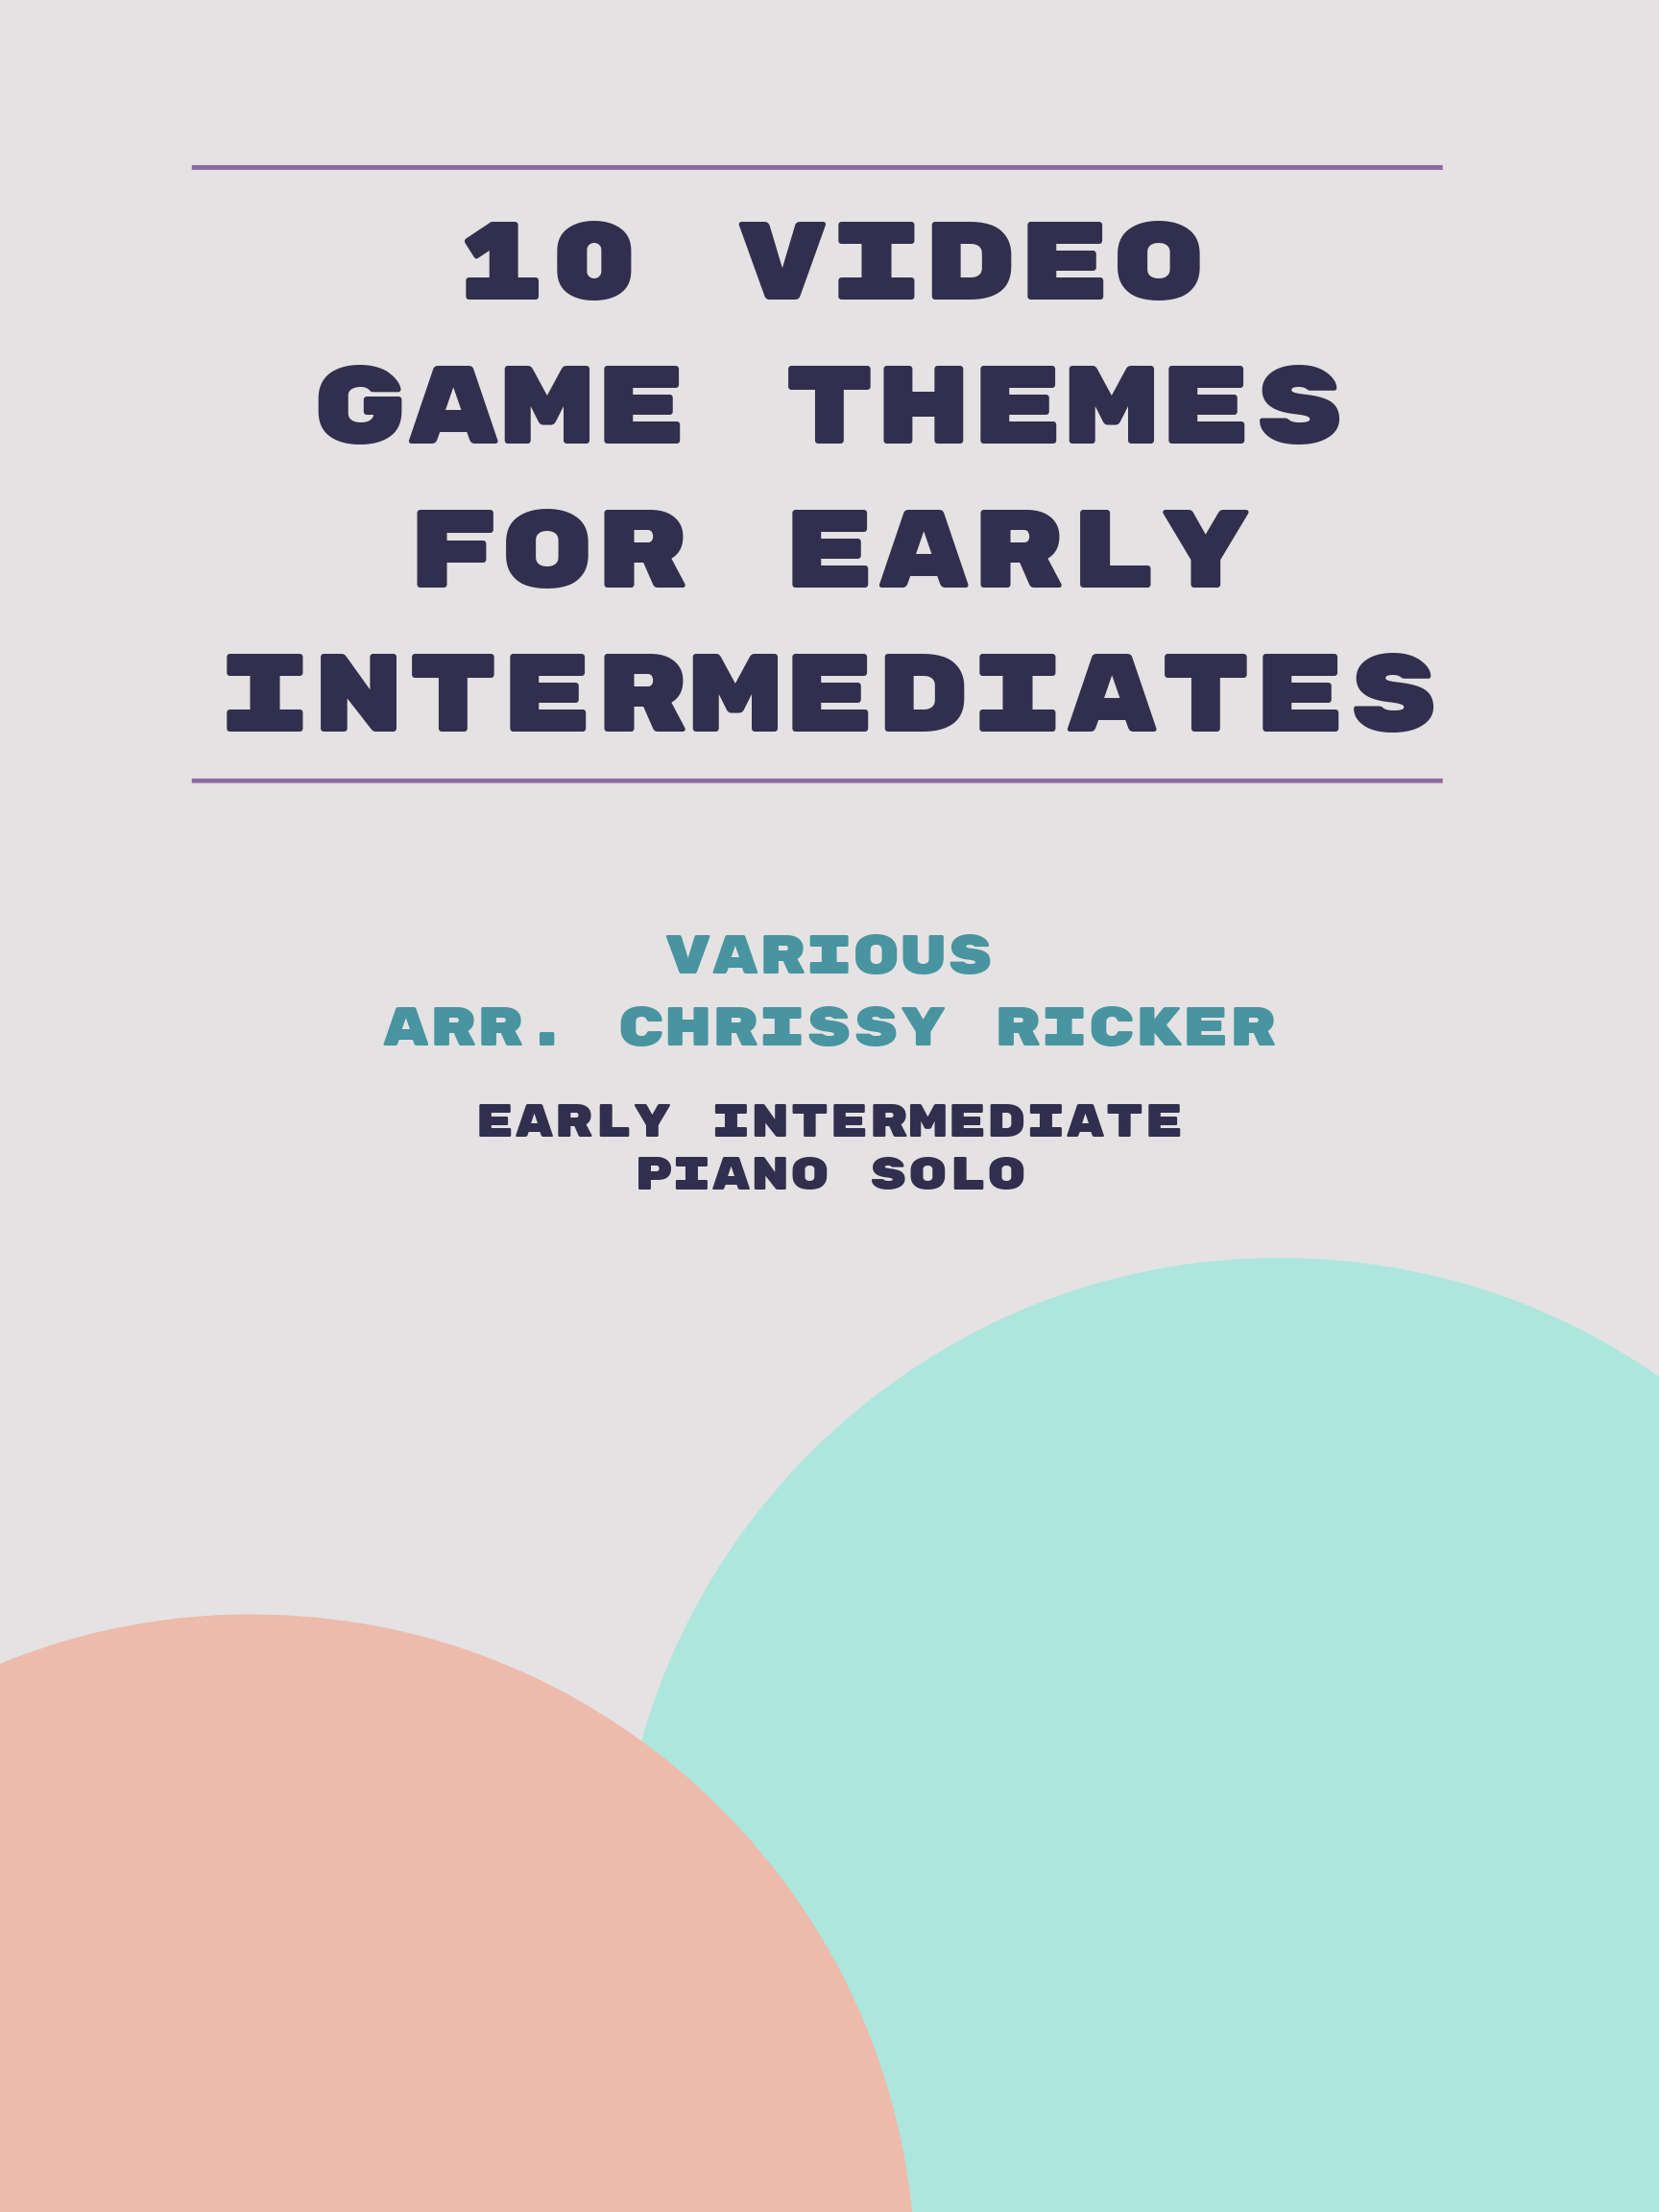 10 Video Game Themes for Early Intermediates Sample Page